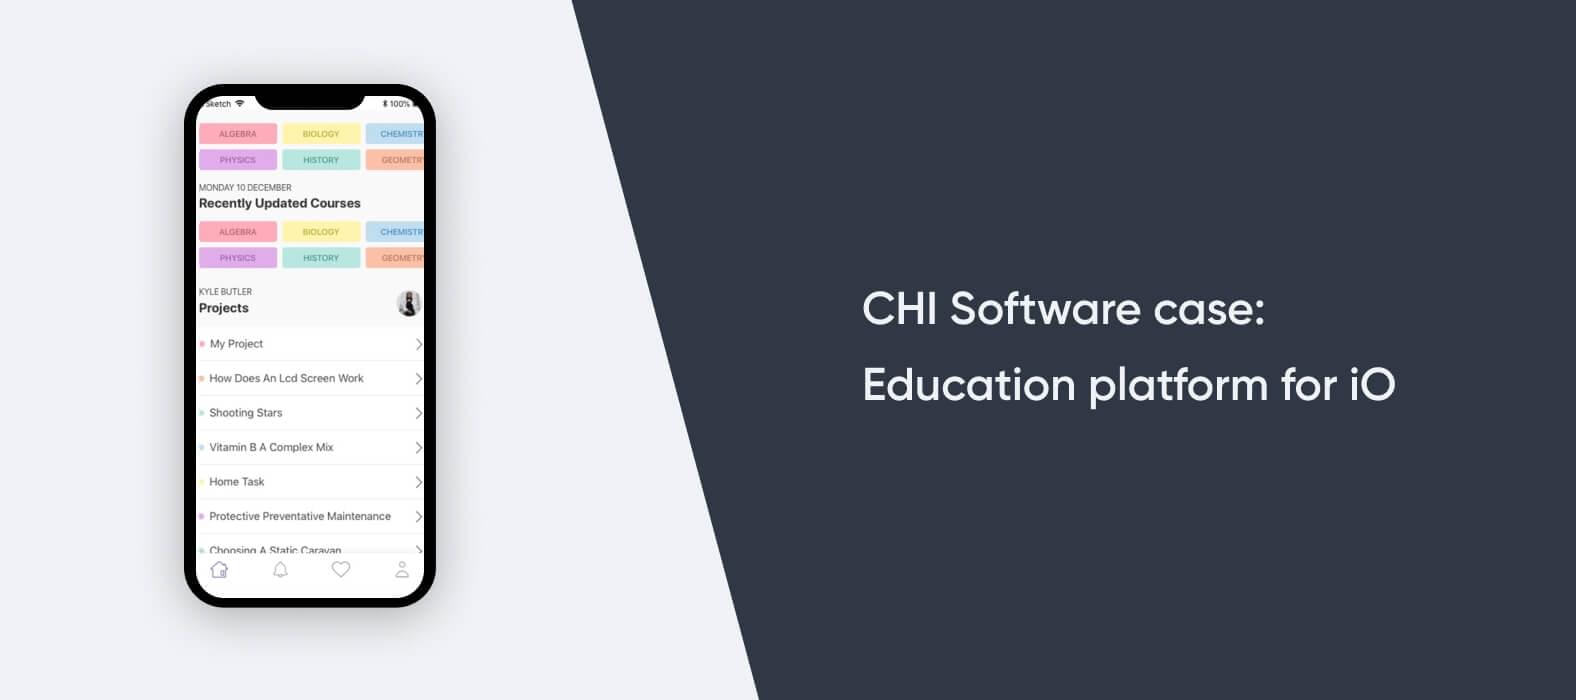 CHI Software case: Education platform for iOS